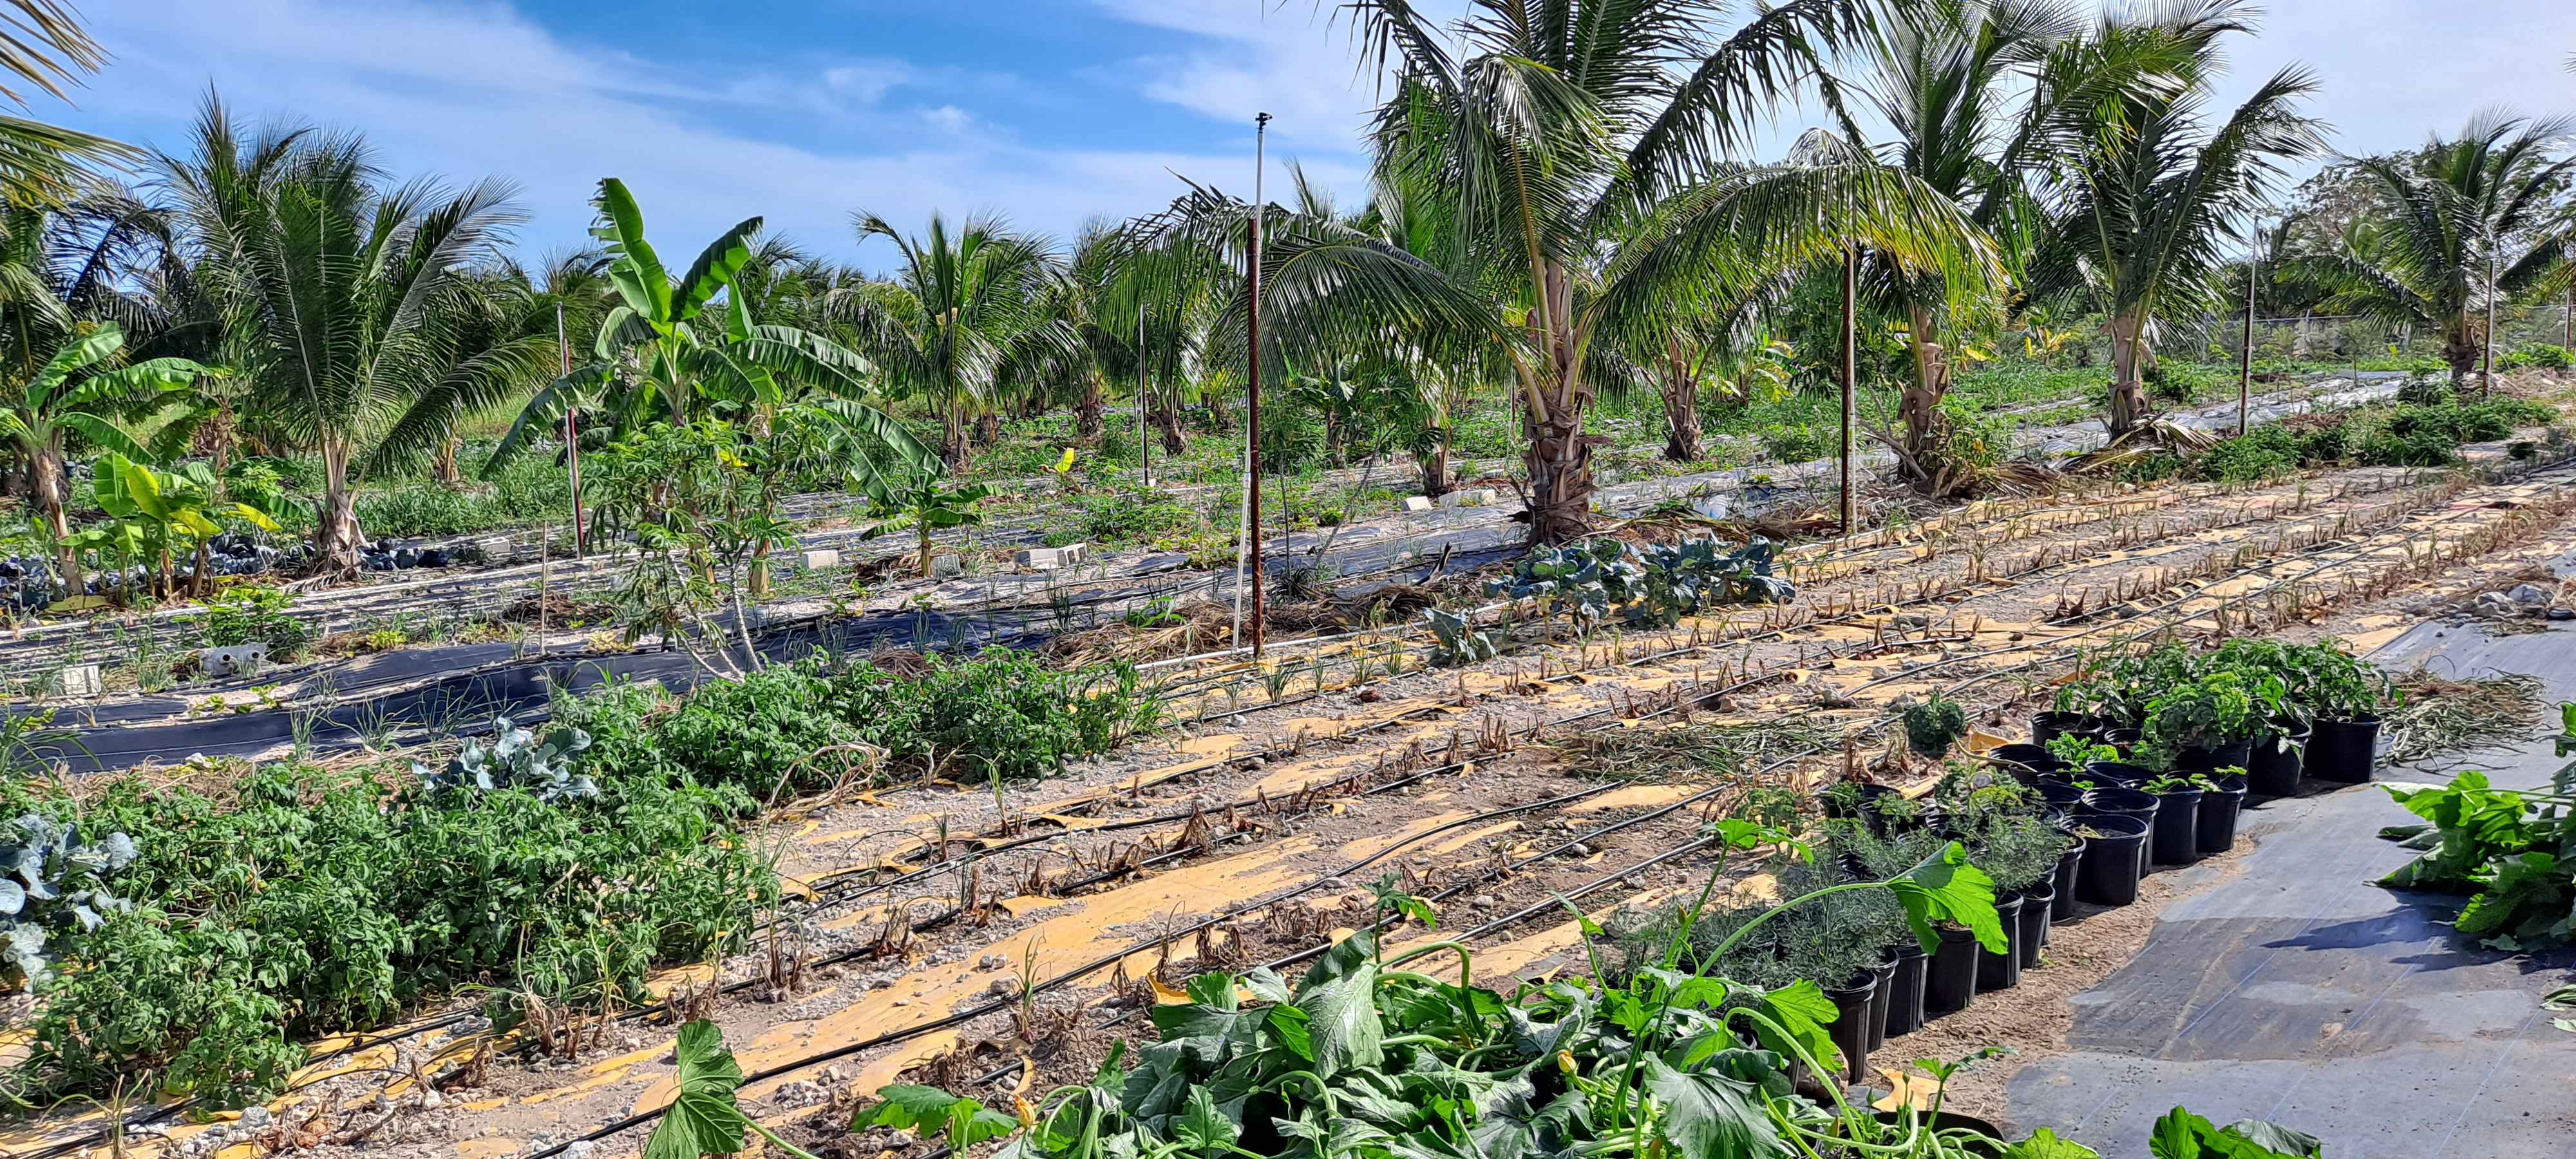 Open Much of the “soil” in the Bahamas is just sand and rock. This third-generation farm is experimenting with planting fruits and vegetables in pots rather than directly into the ground. Photo courtesy of Debi Kelly.